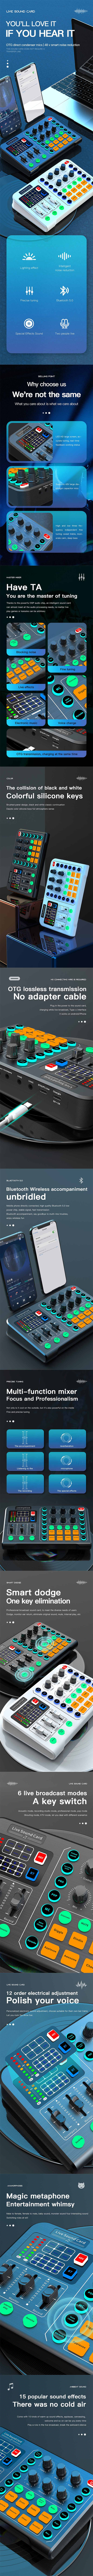 M6 48V Wireless Live Sound Card Multi-function Voice Changer Professional Broadcast Sound Mixer One-Key Elimination Support BT5.0 for Live Streaming Broadcast Podcasting